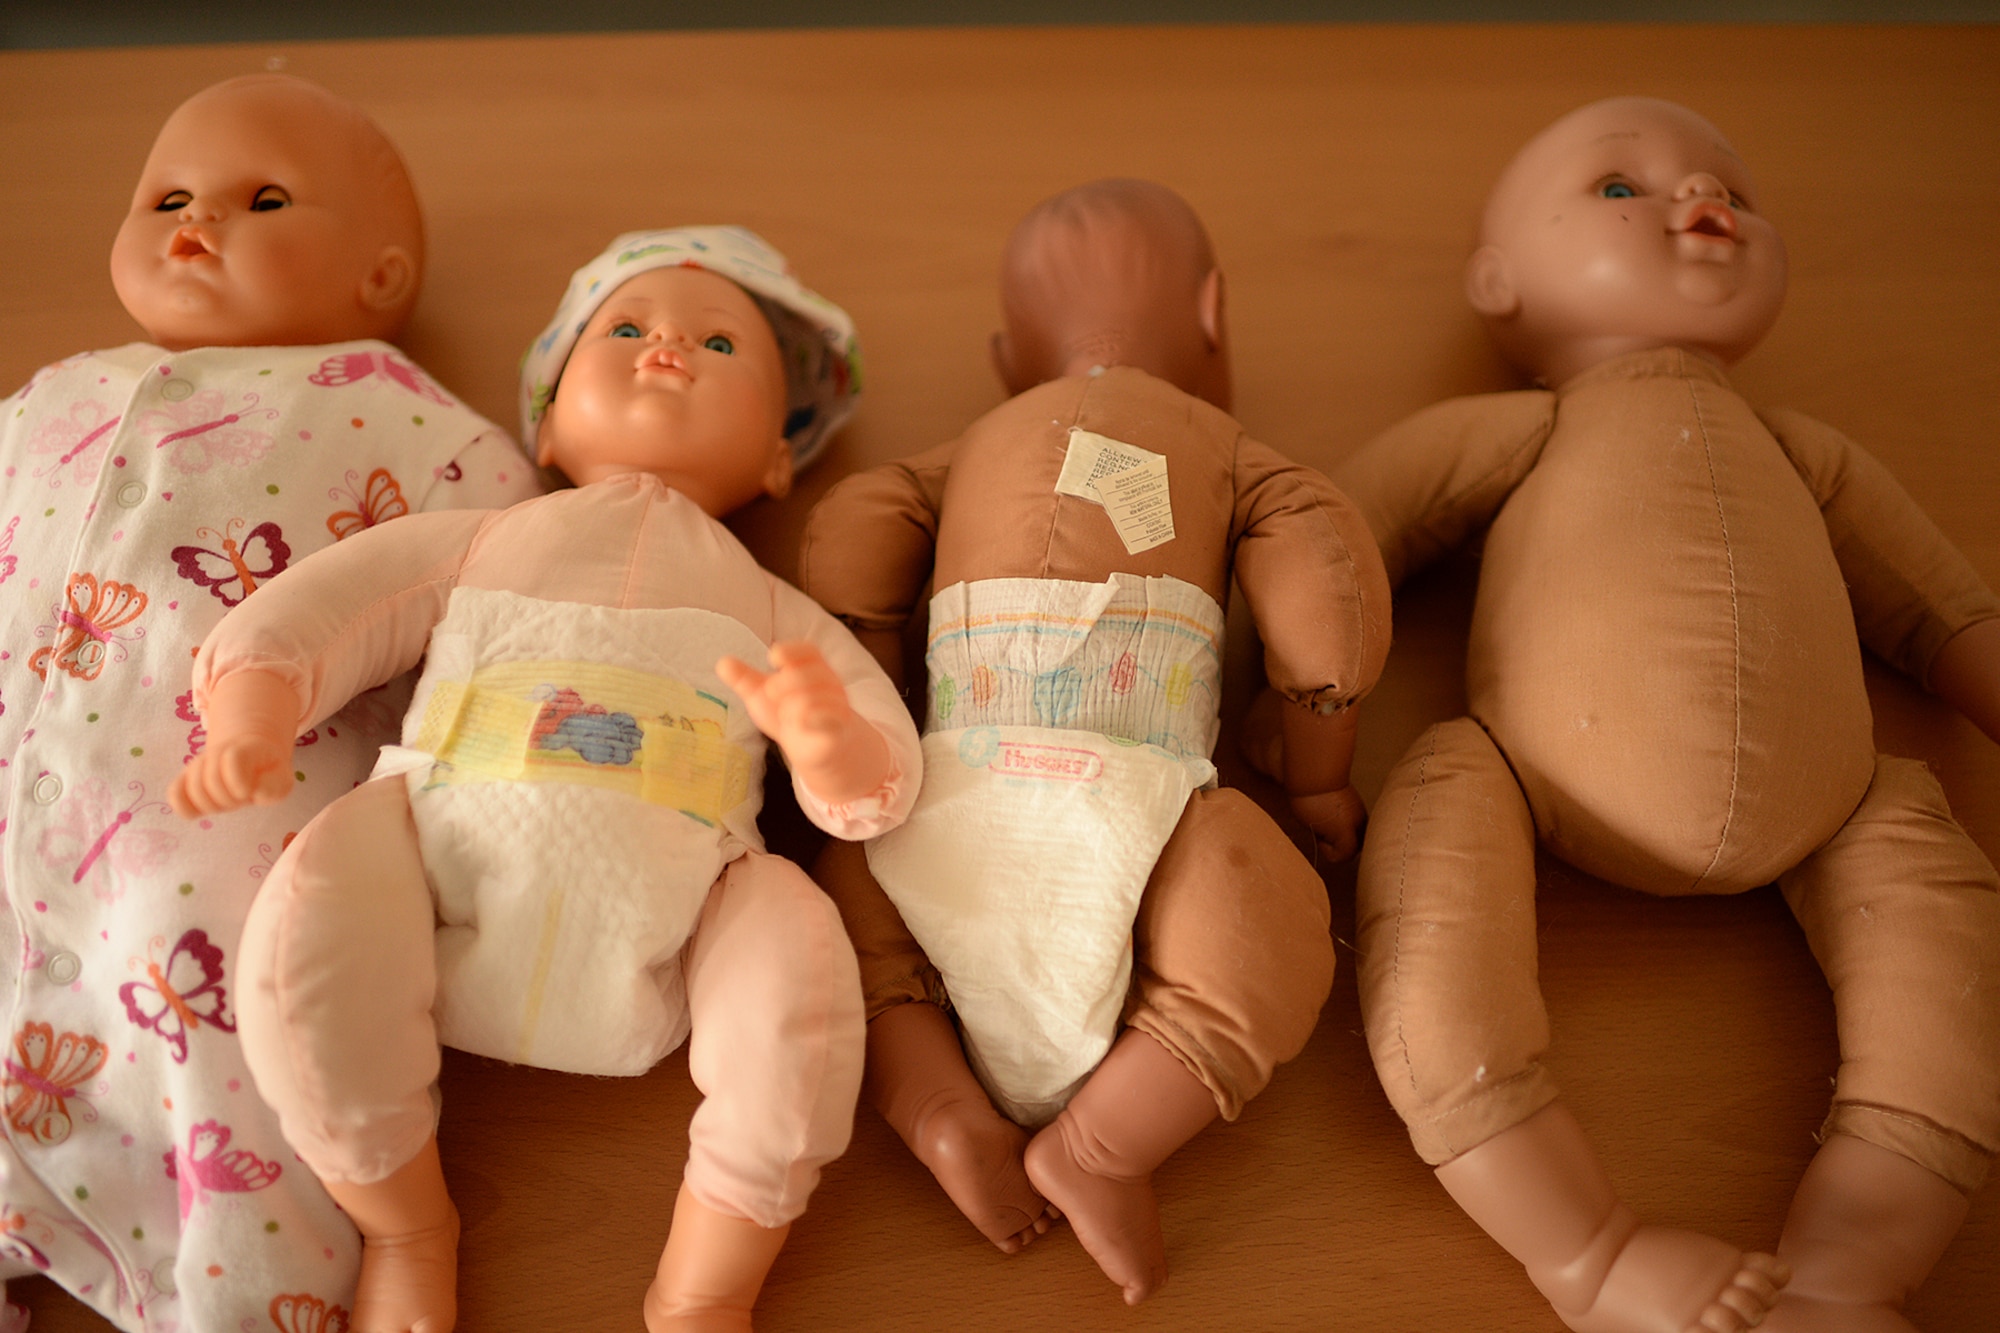 Dolls rest on a table during a Babies 201 class at Spangdahlem Air Base, Germany, March 19, 2014. Babies 201 is an advanced level of parent education taught by the 52nd Medical Operations Squadron Family Advocacy's New Parent Support Program. Trained nurses and staff run these courses throughout the year, with Babies 201 offered once a month. (U.S. Air Force photo by Staff Sgt. Daryl Knee/Released)